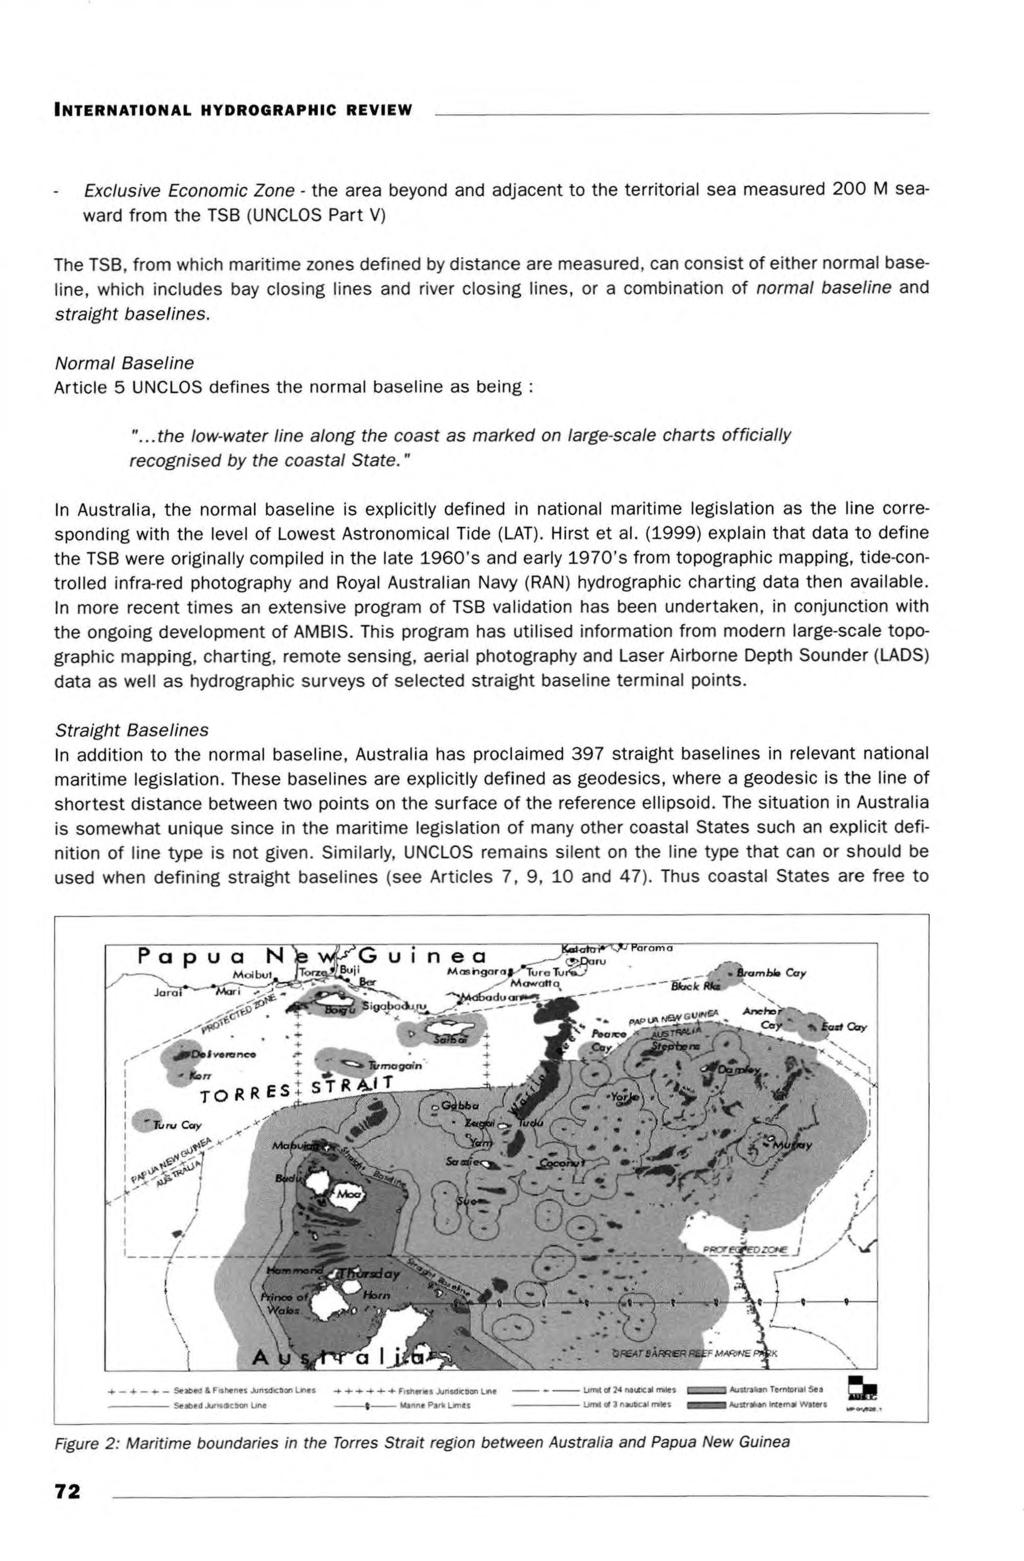 Exclusive Economic Zone - the area beyond and adjacent to the territorial sea measured 200 M seaward from the TSB (UNCLOS Part V) The TSB, from which maritime zones defined by distance are measured,